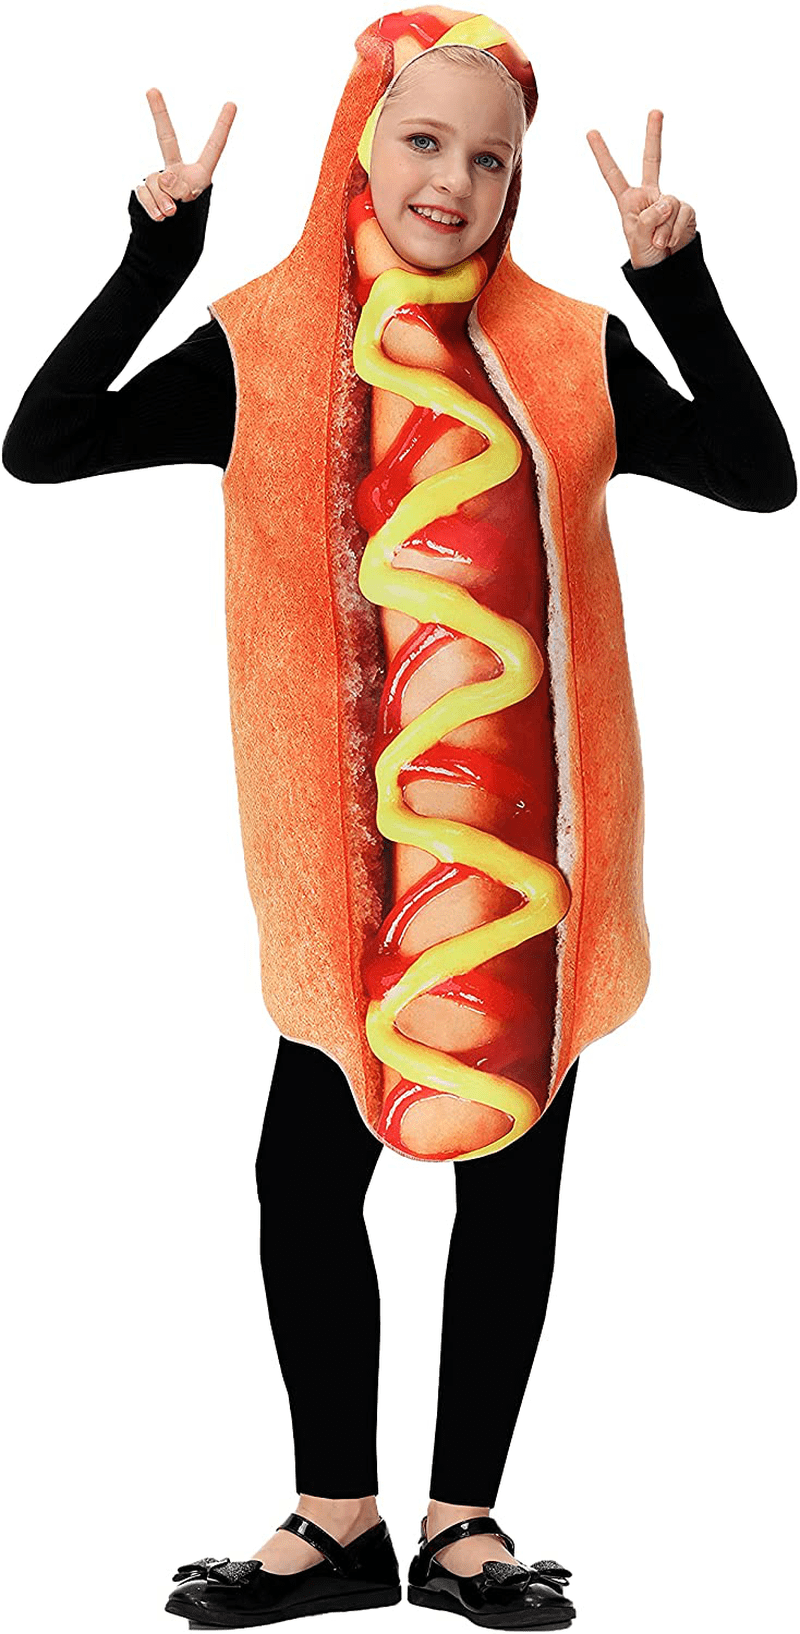 AOBUTE Kid's Pizza Hot Dog Costume Boys Girls Funny Halloween Food Outfit